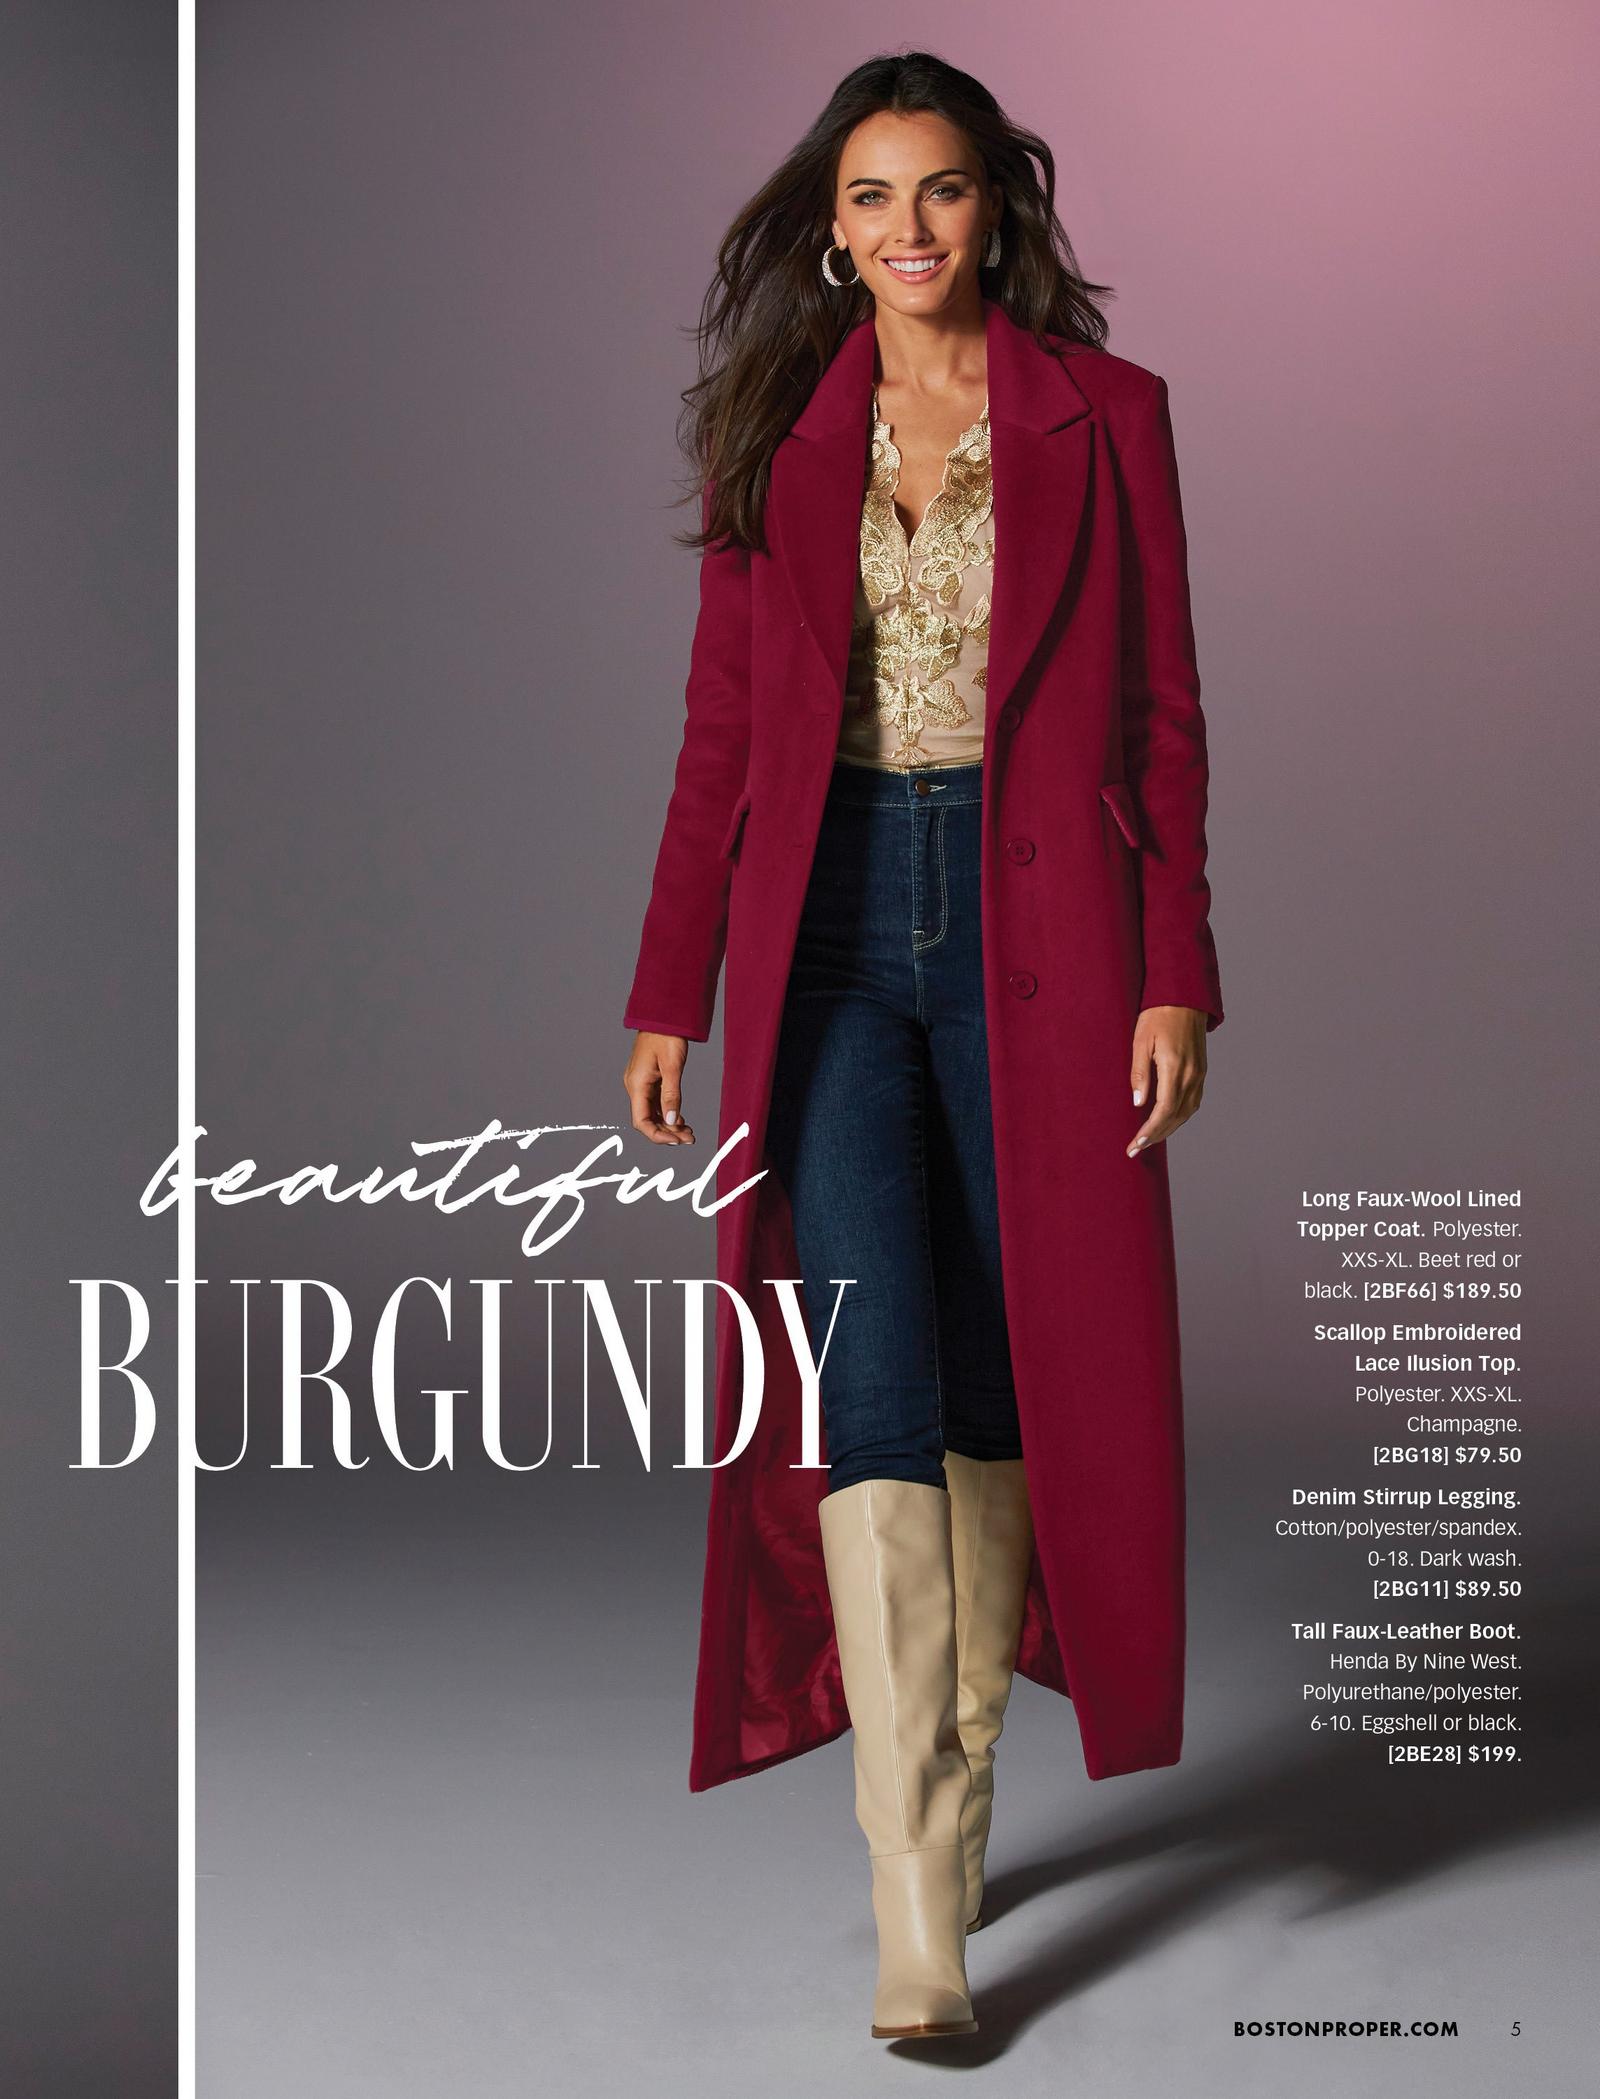 model wearing a burgundy faux-wool long coat, gold lace embroidered top, denim leggings, and tan faux-leather boots.